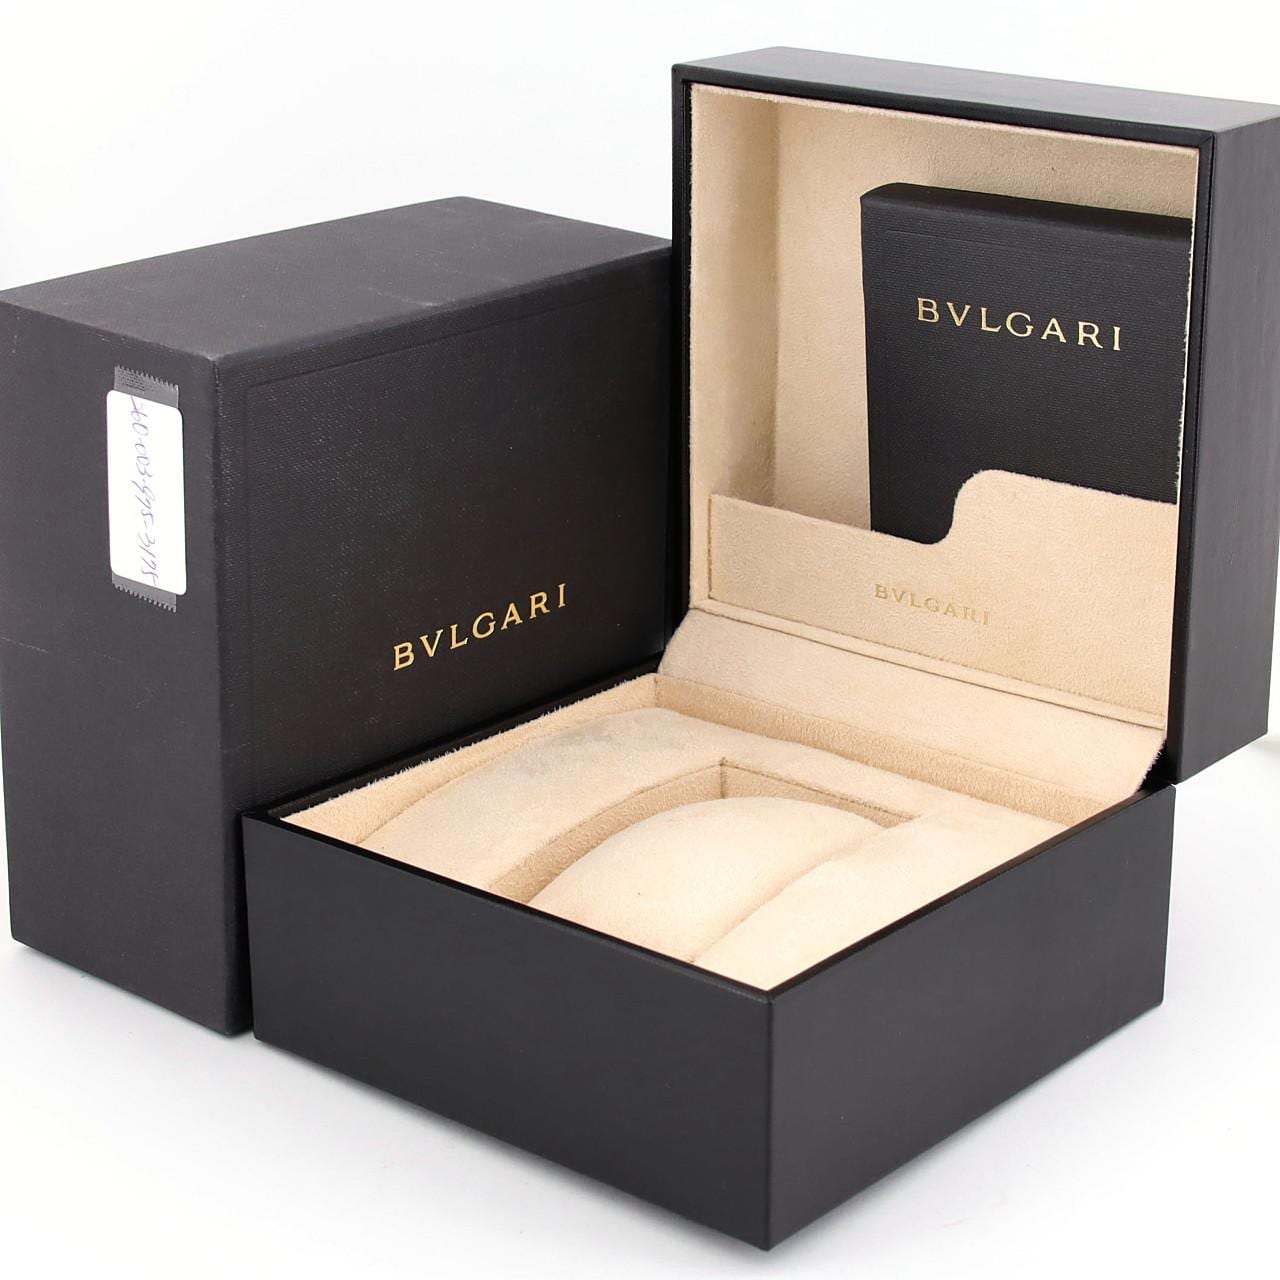 BVLGARI Show Macronograph AA48SCH/AA48BSSDCH/AT SS Automatic